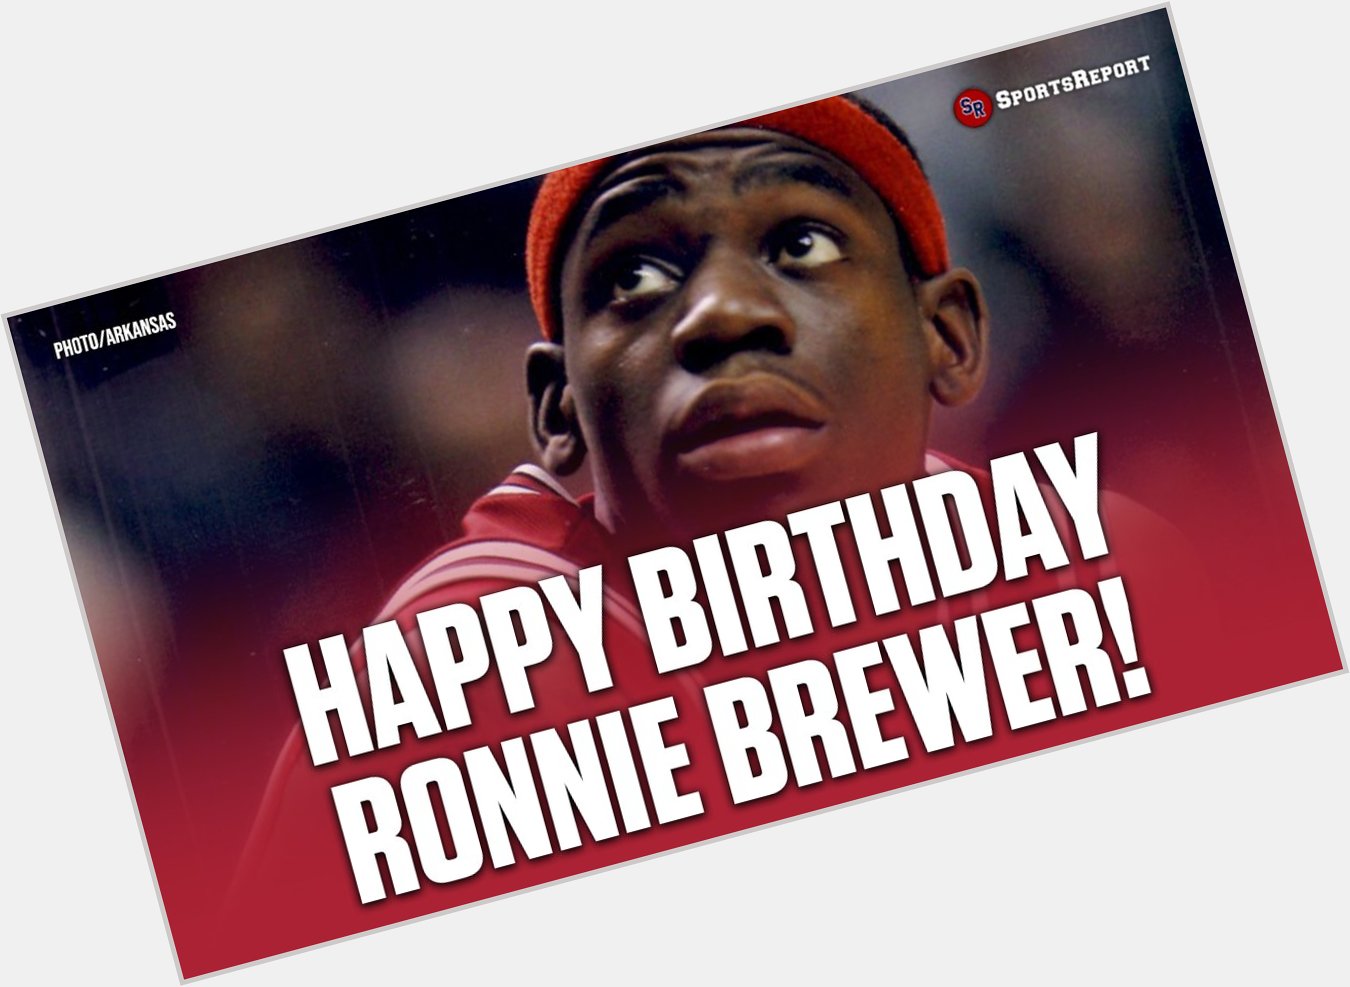  Fans, let\s wish great Ronnie Brewer a Happy Birthday! 